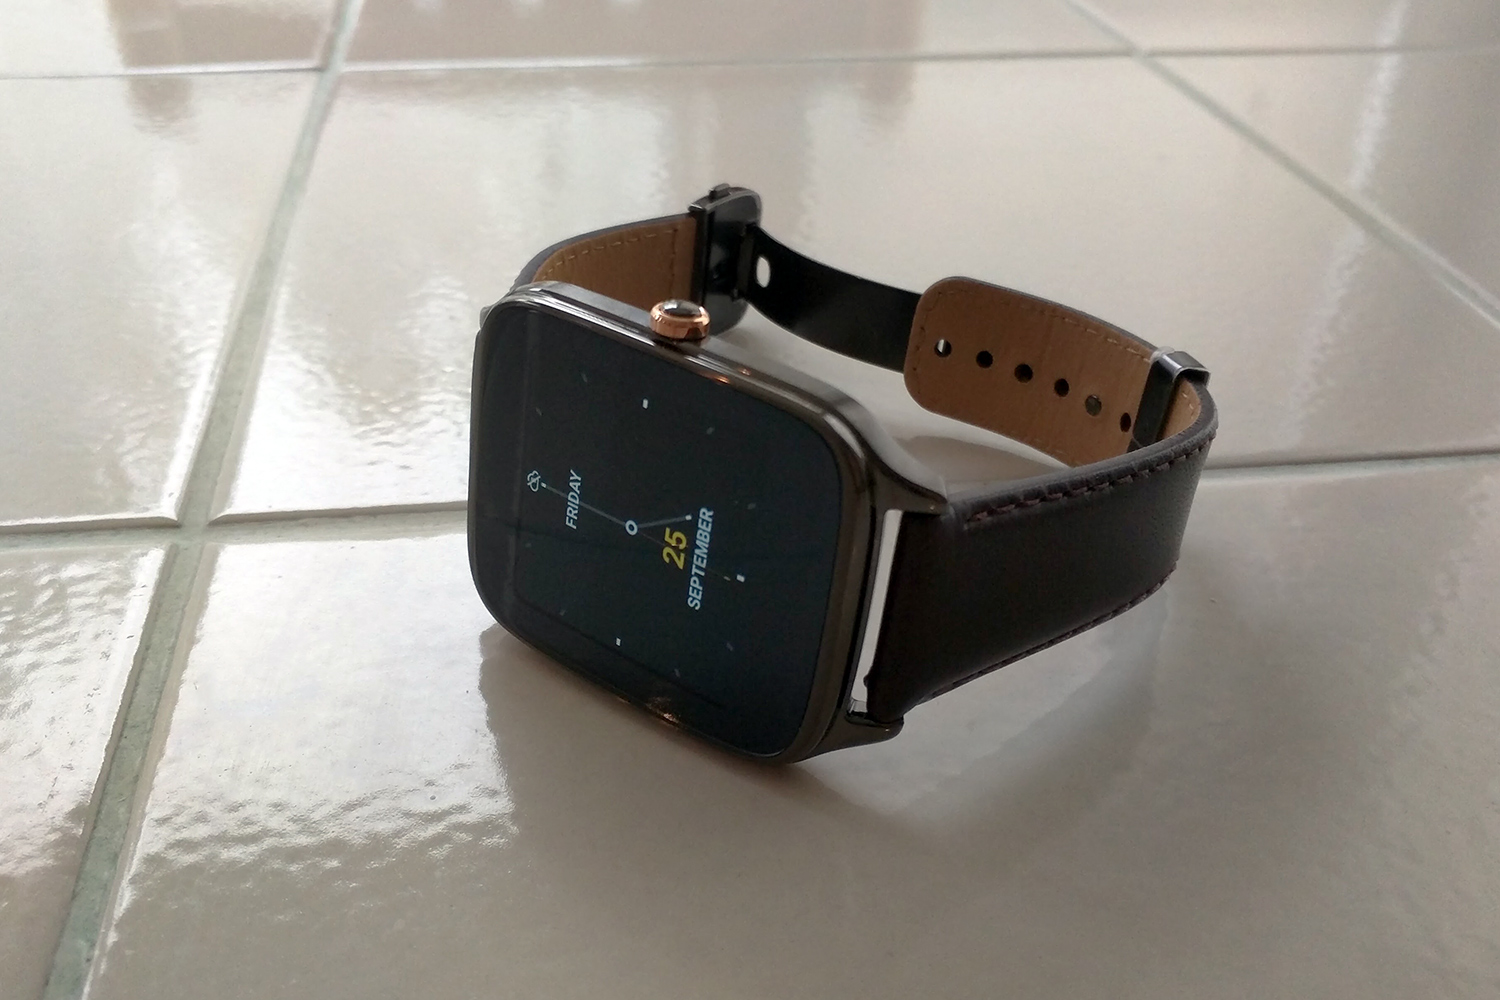 Asus ZenWatch 2, Review, Specs, Price, and More